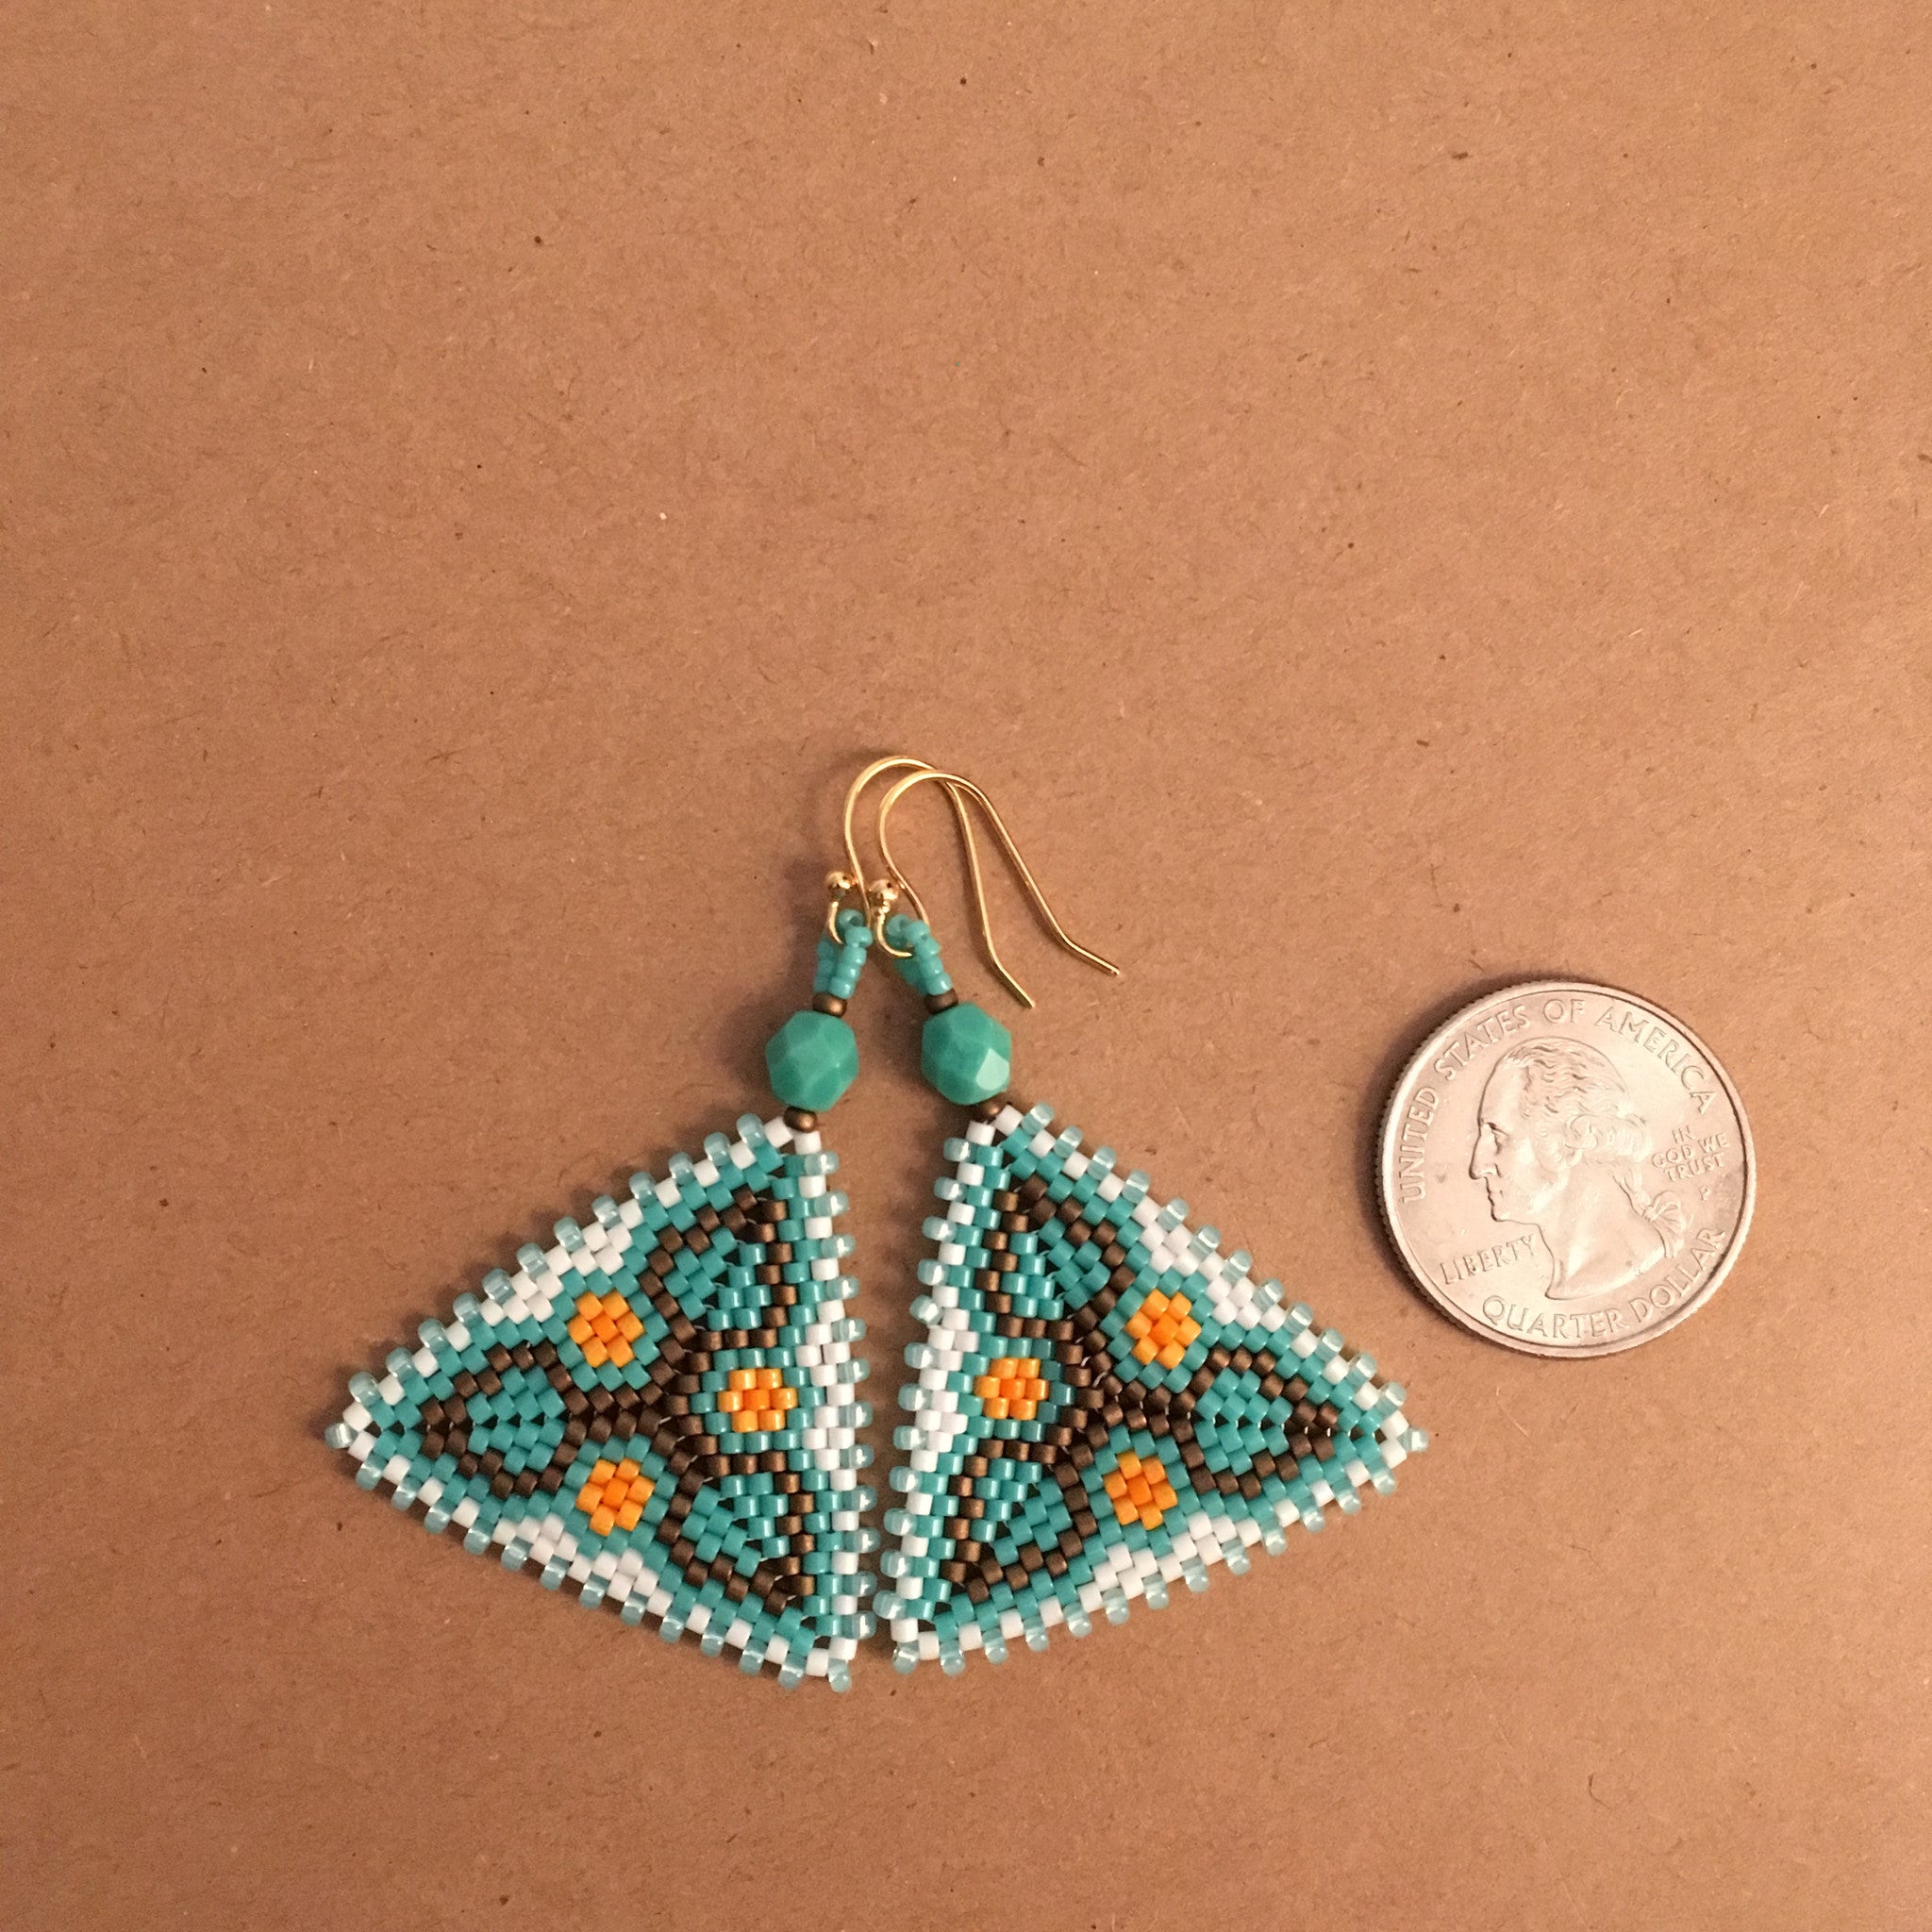 Turquoise Flower and Leaf Earrings in a Peyote Triangle